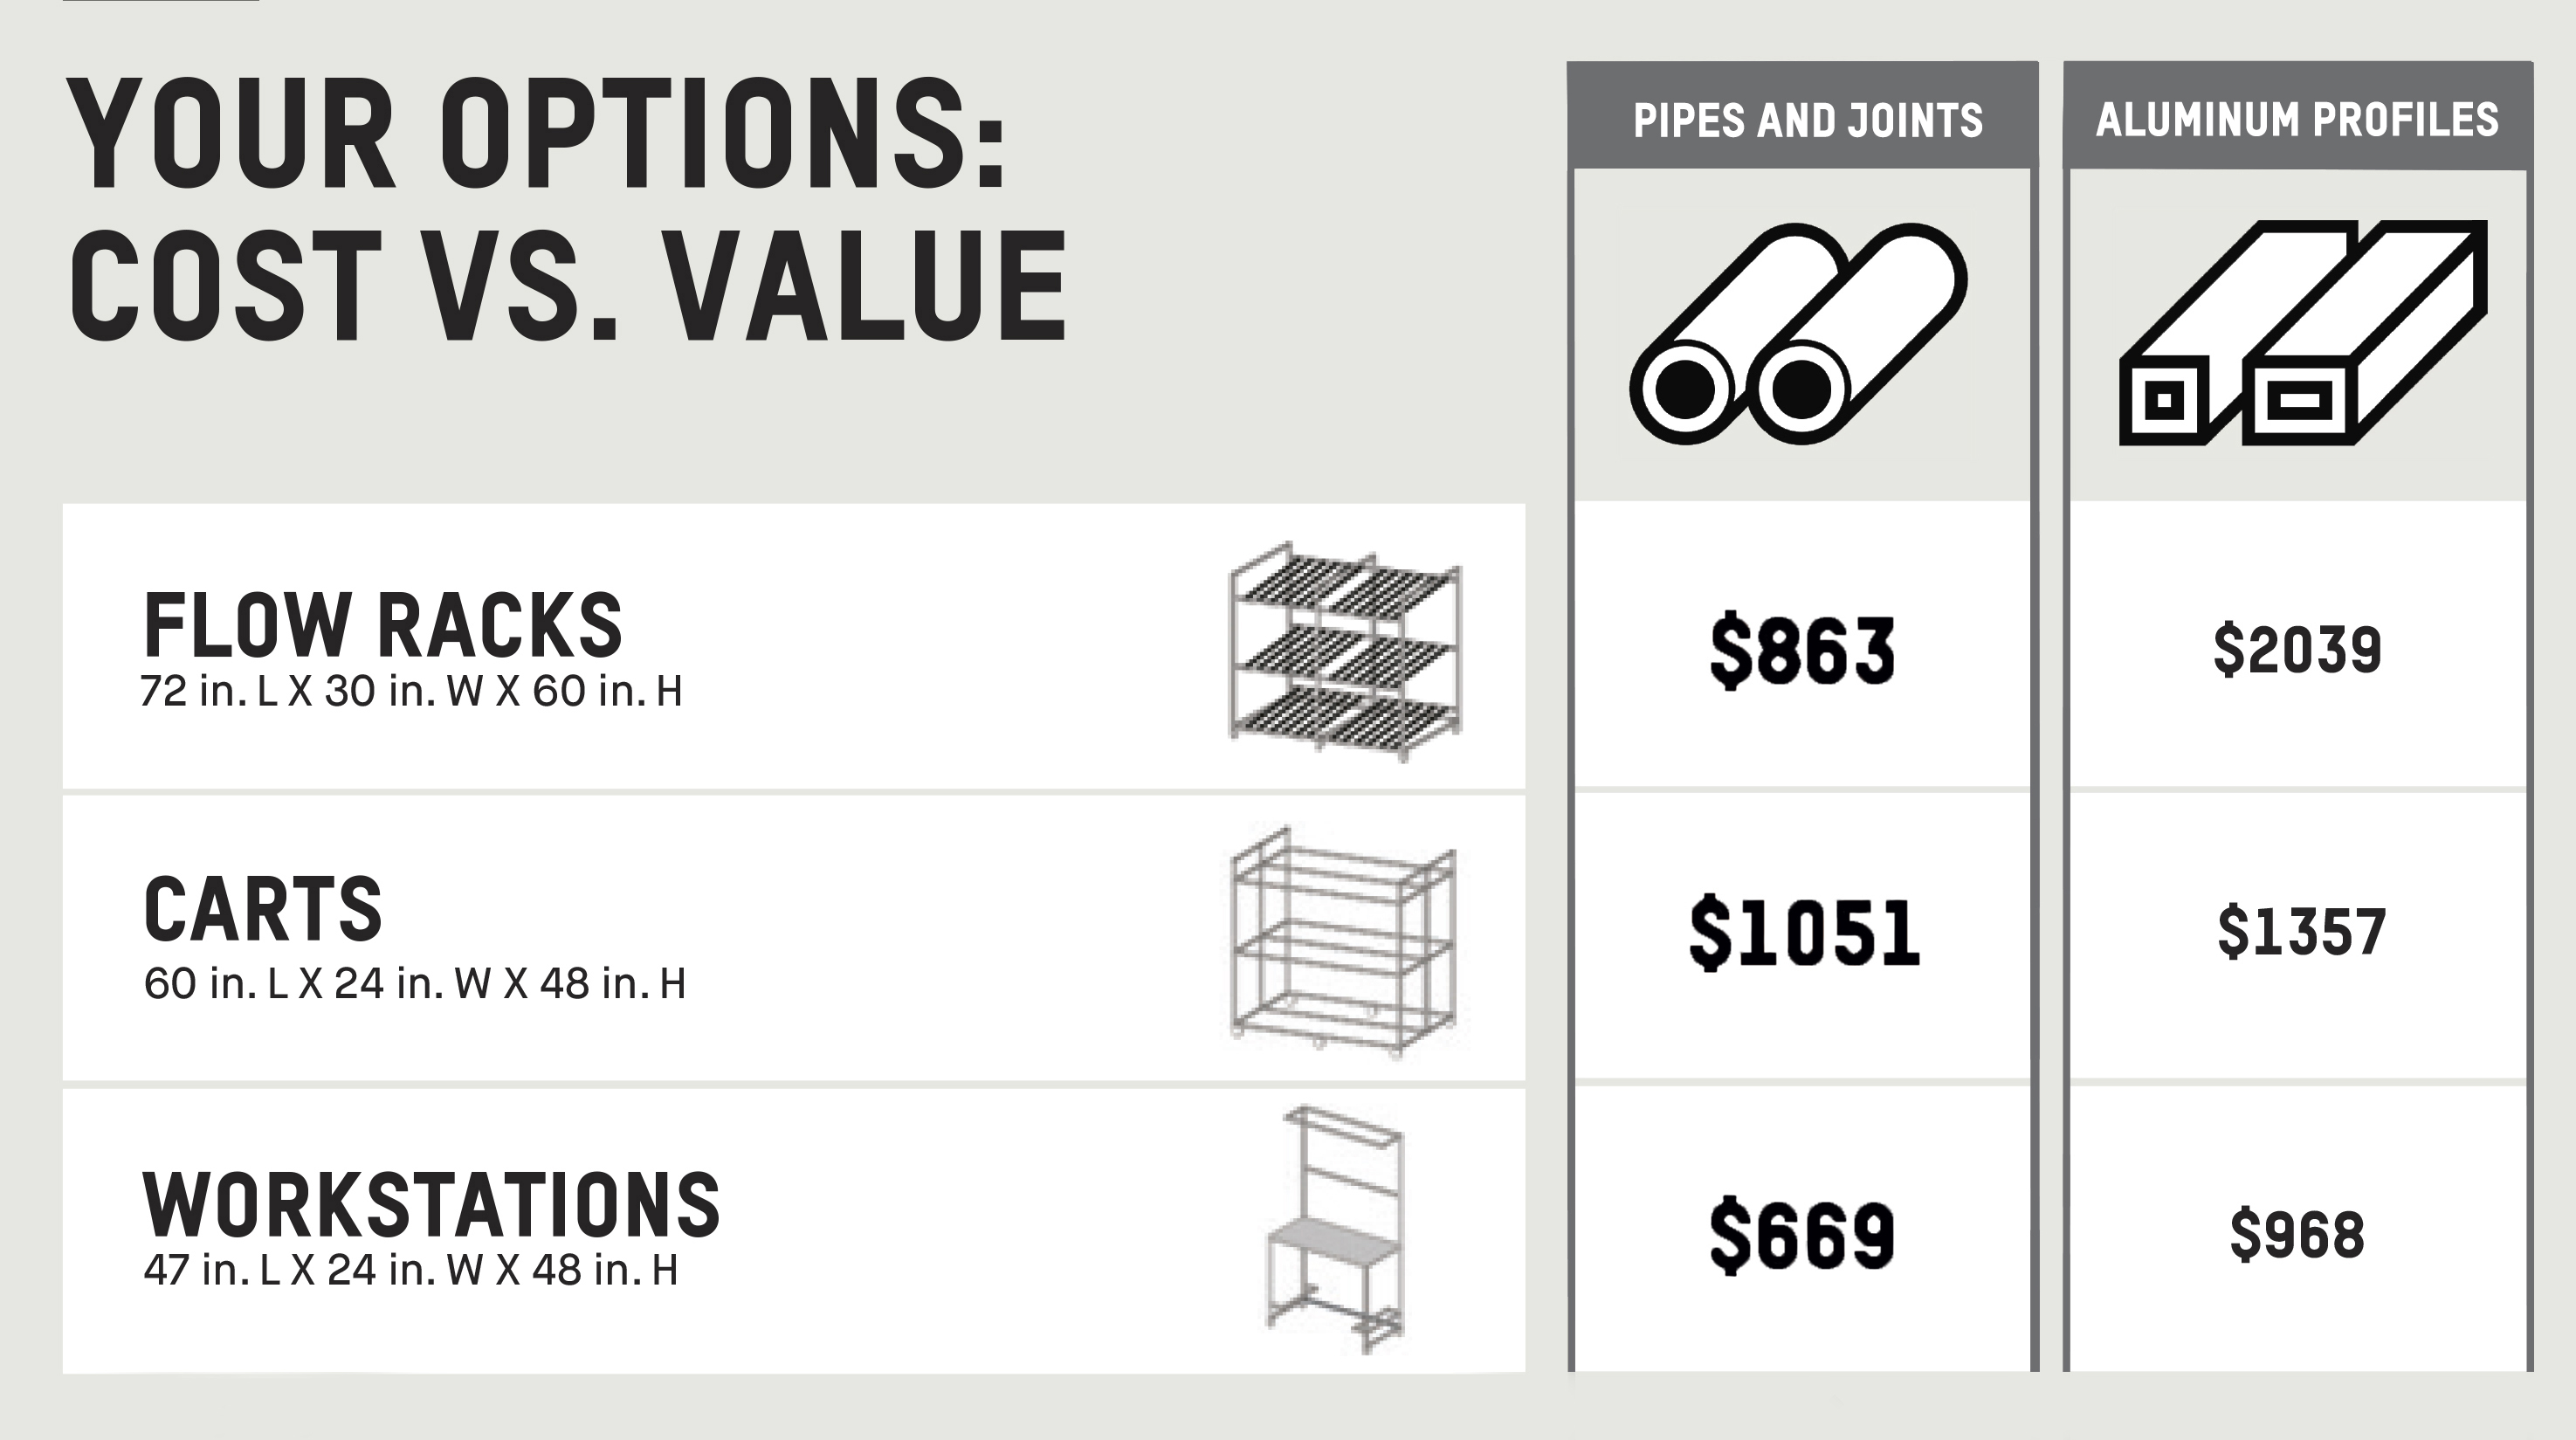 Chart showing the different prices for the same structures, in aluminum or pipes